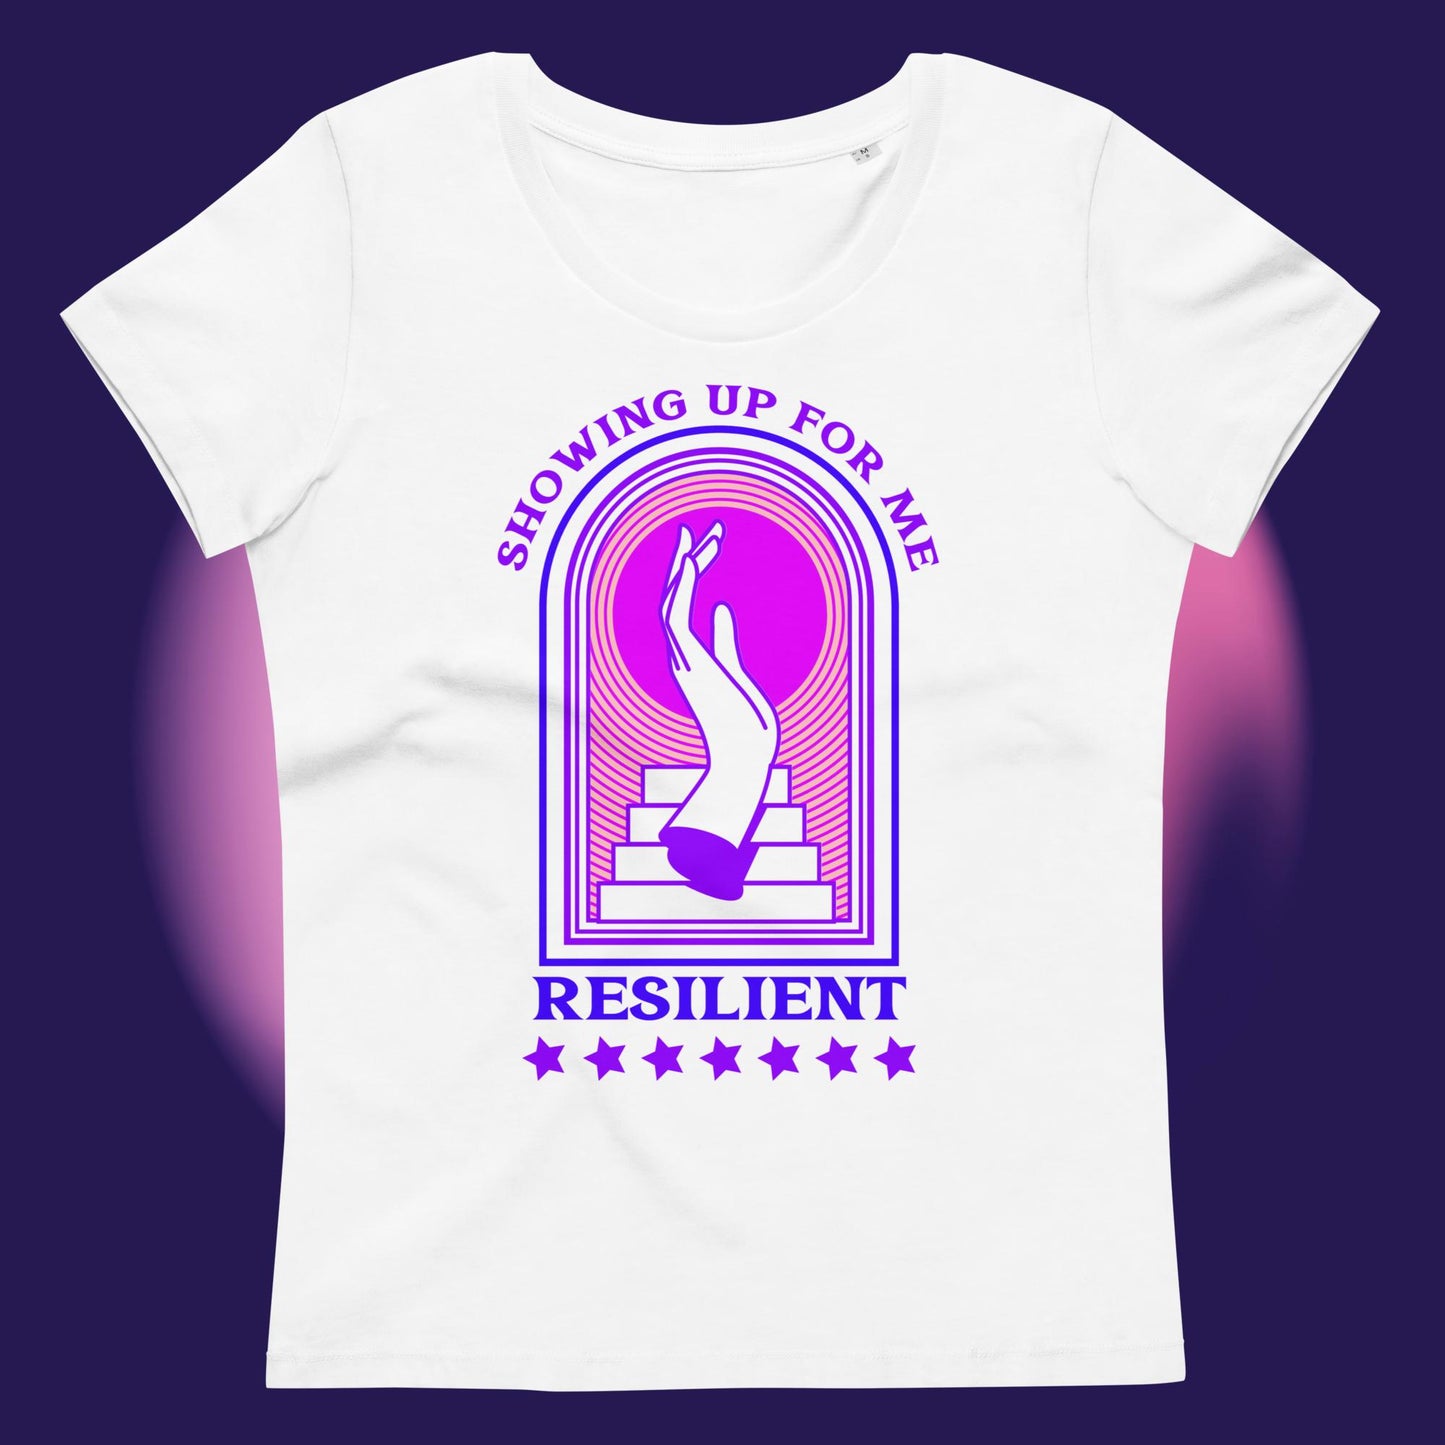 Showing Up Resilient: Women's fitted eco tee